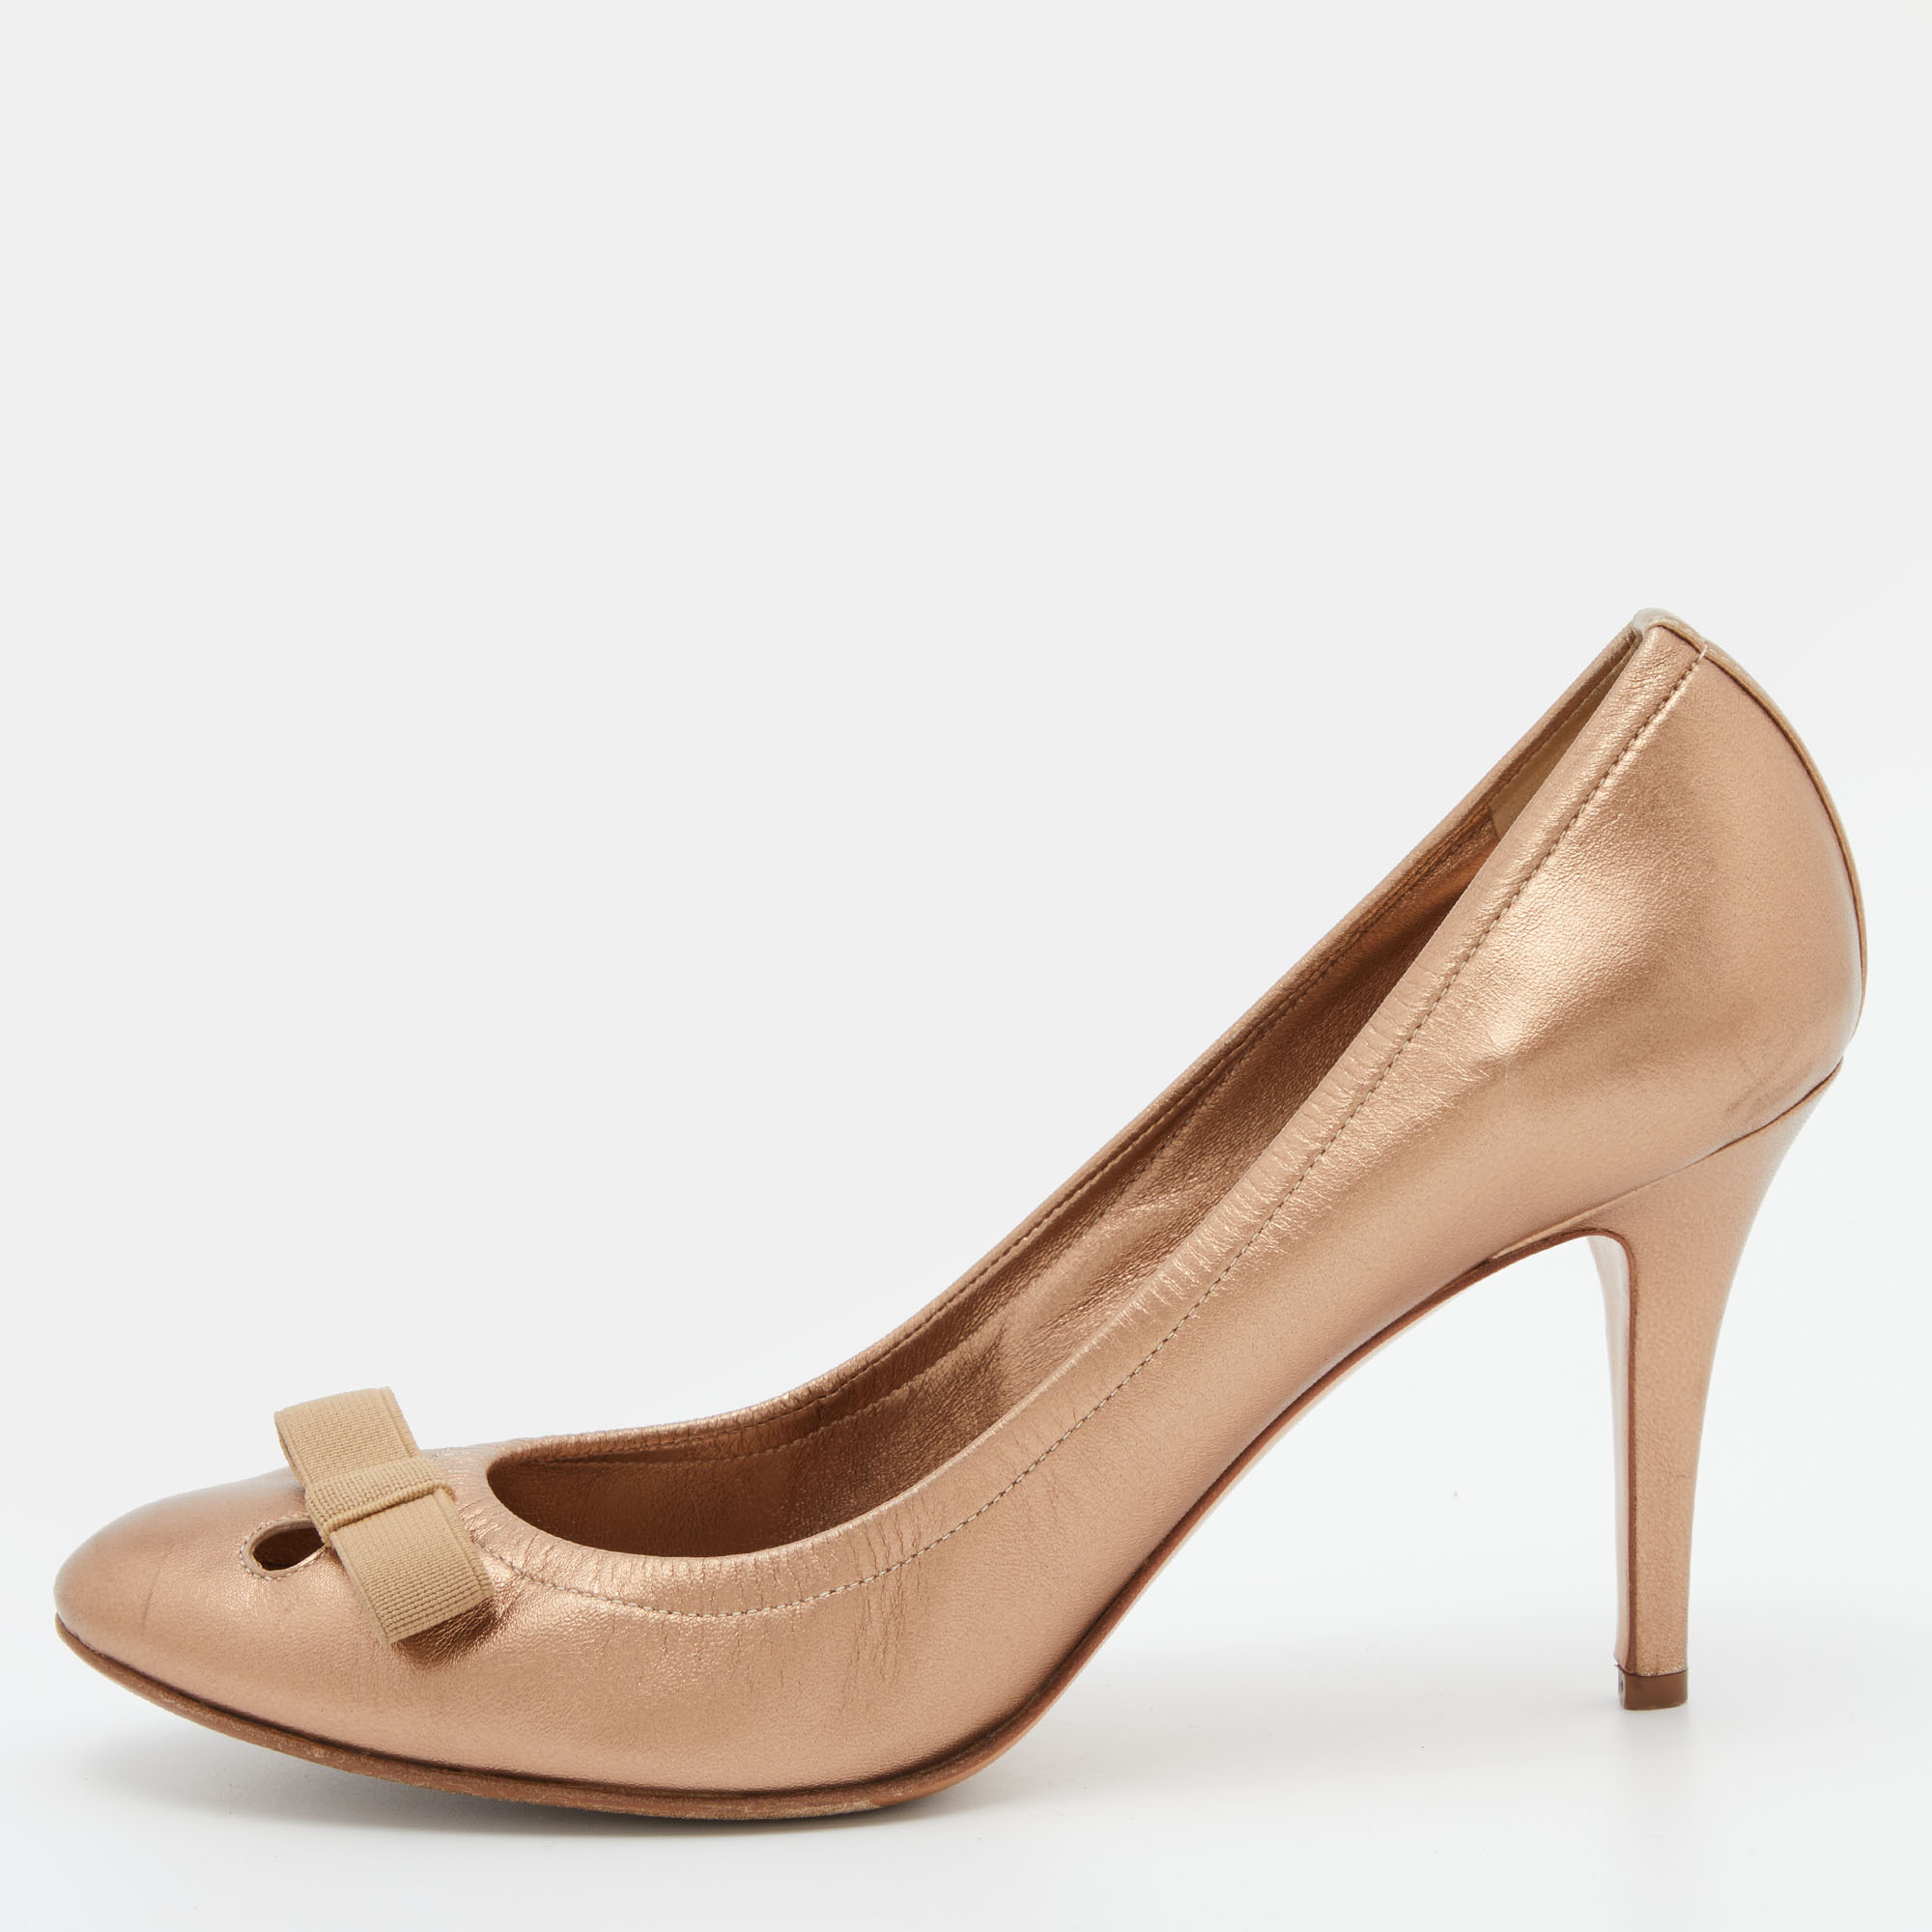 Buy Women Pumps Online - Preloved Collection 2022 - Reluxable